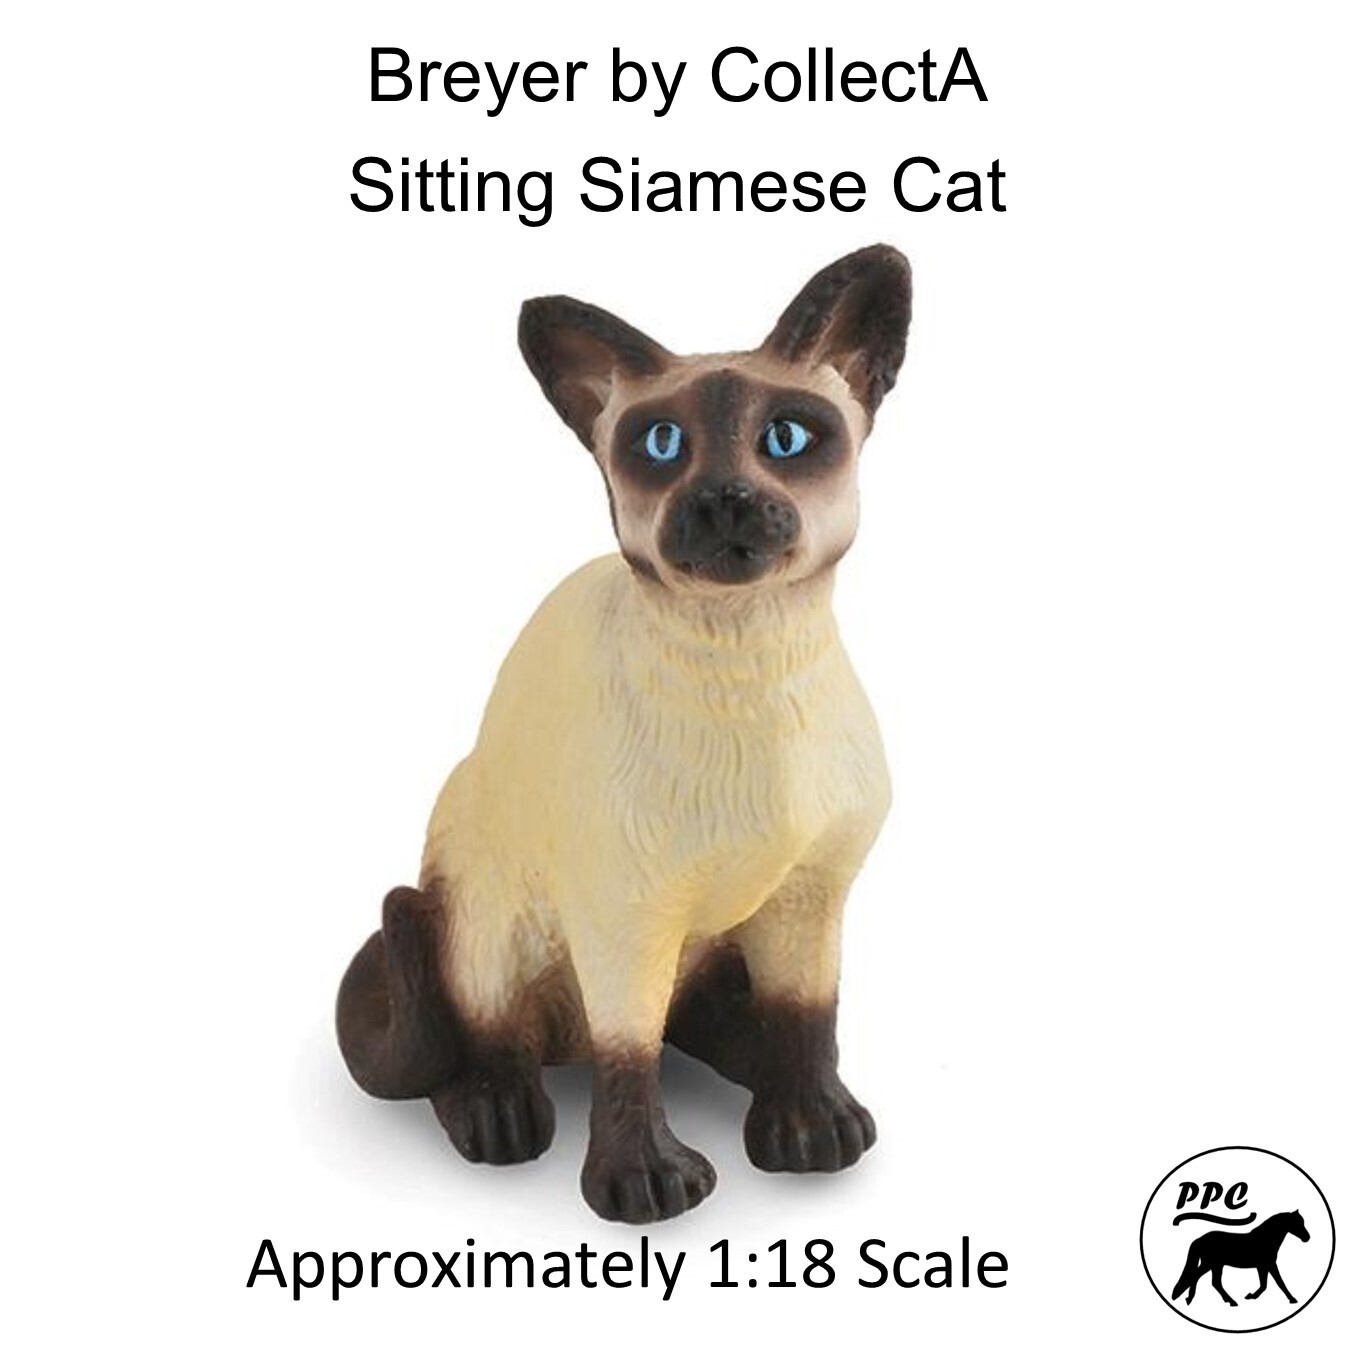 Breyer by Collecta Sitting Siamese Cat